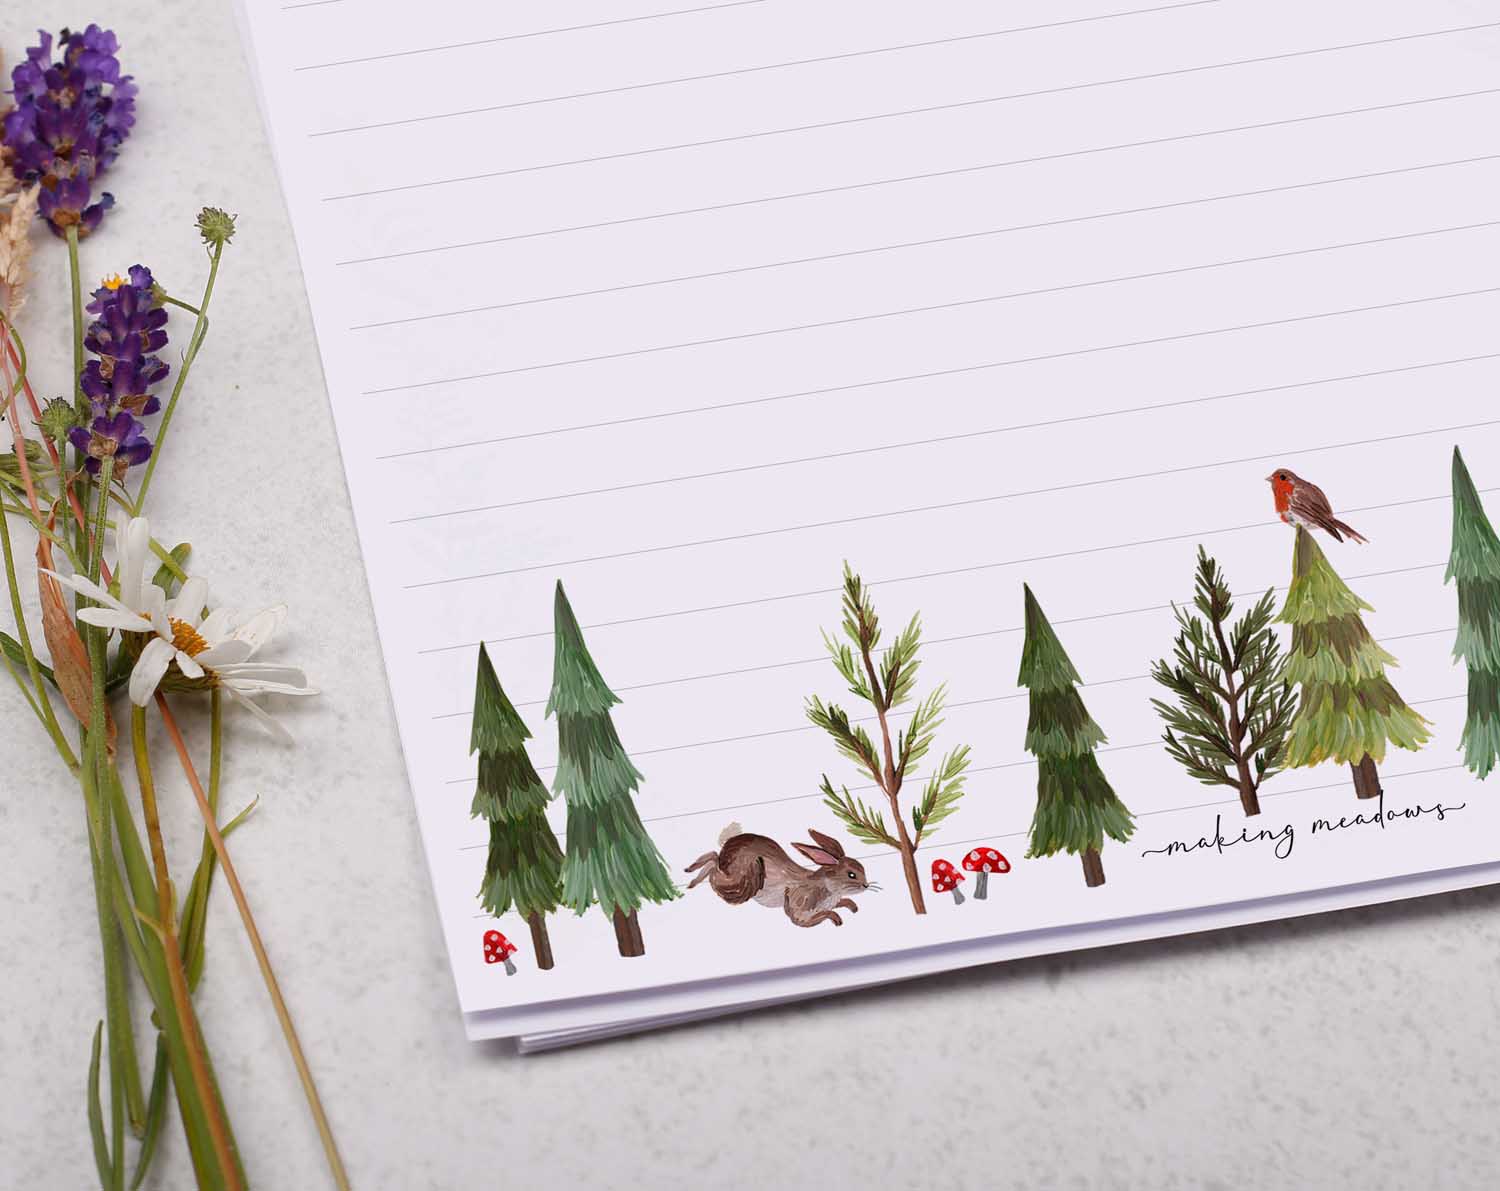 A4 letter writing paper sheets with a woodland animal and pine trees border design.